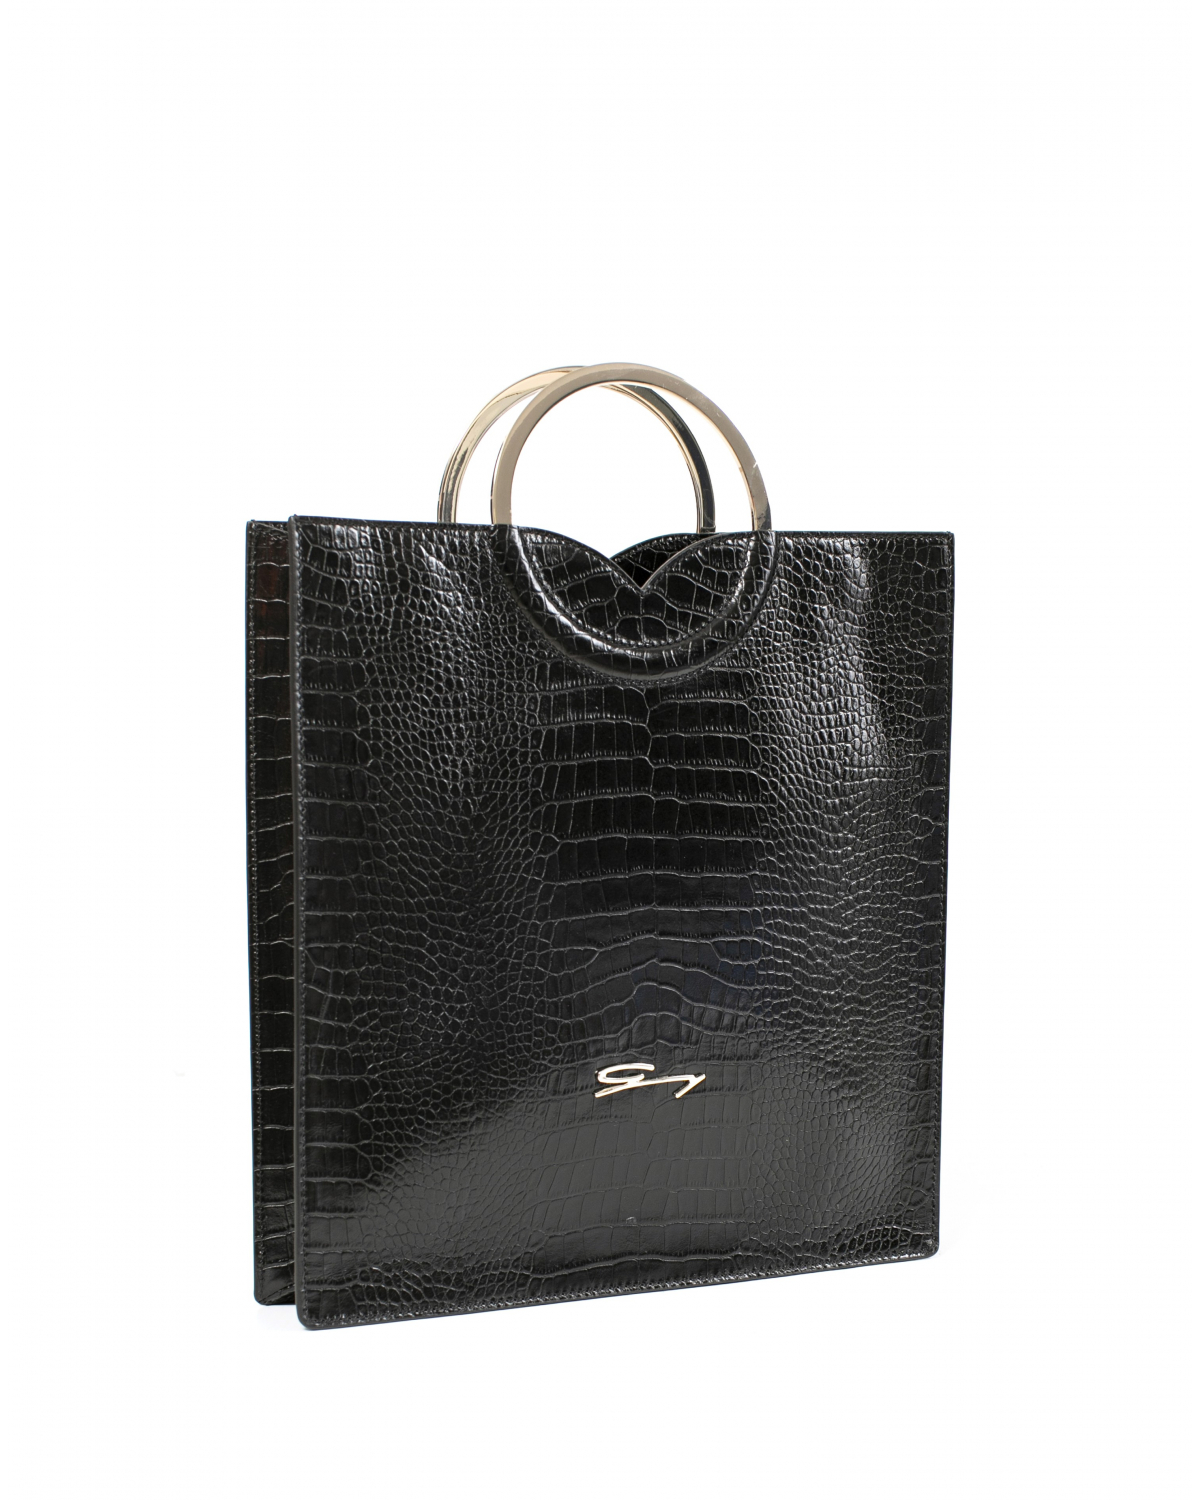 Black leather square bag with round metal handles | Accessories, -40% | Genny